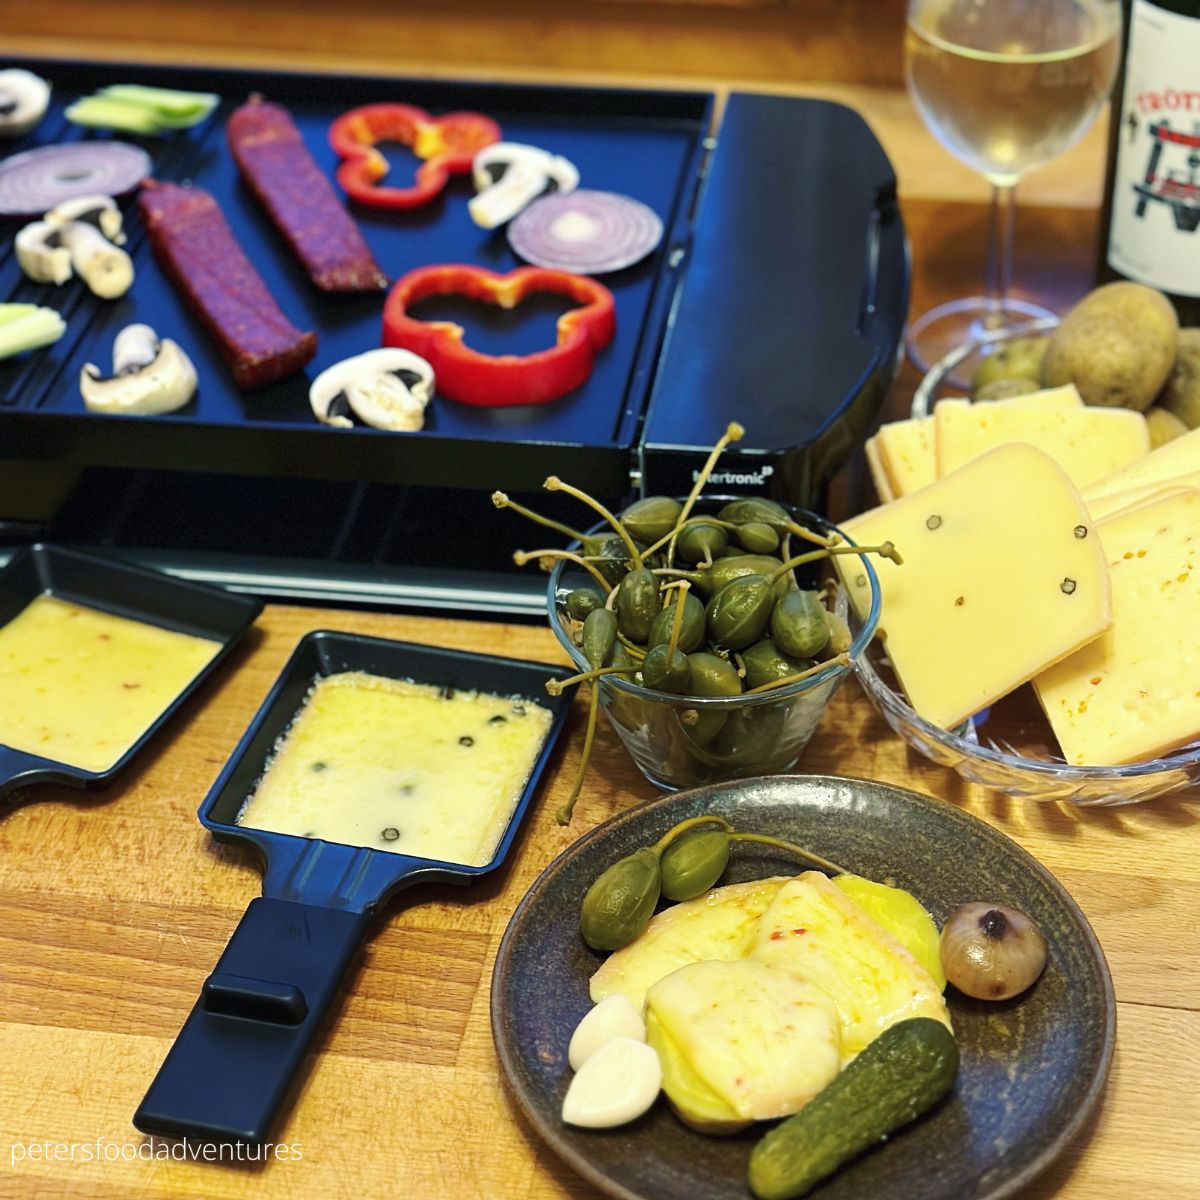 How To Make Raclette Dinner - Christmas! - The Savvy Age